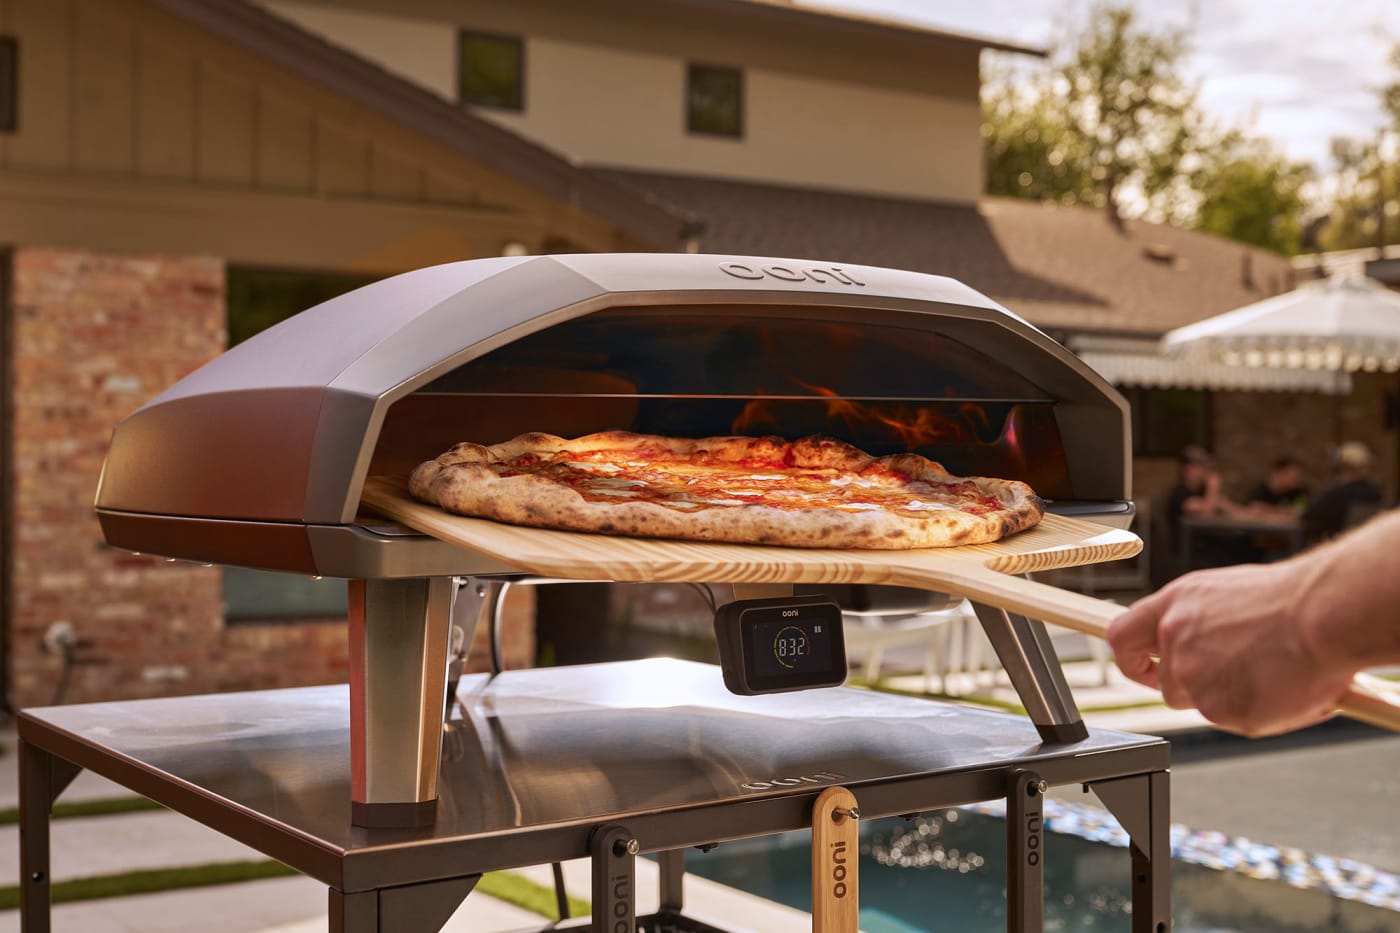 Ooni's larger, dual-zone Koda 2 Max pizza oven is now available for pre-order